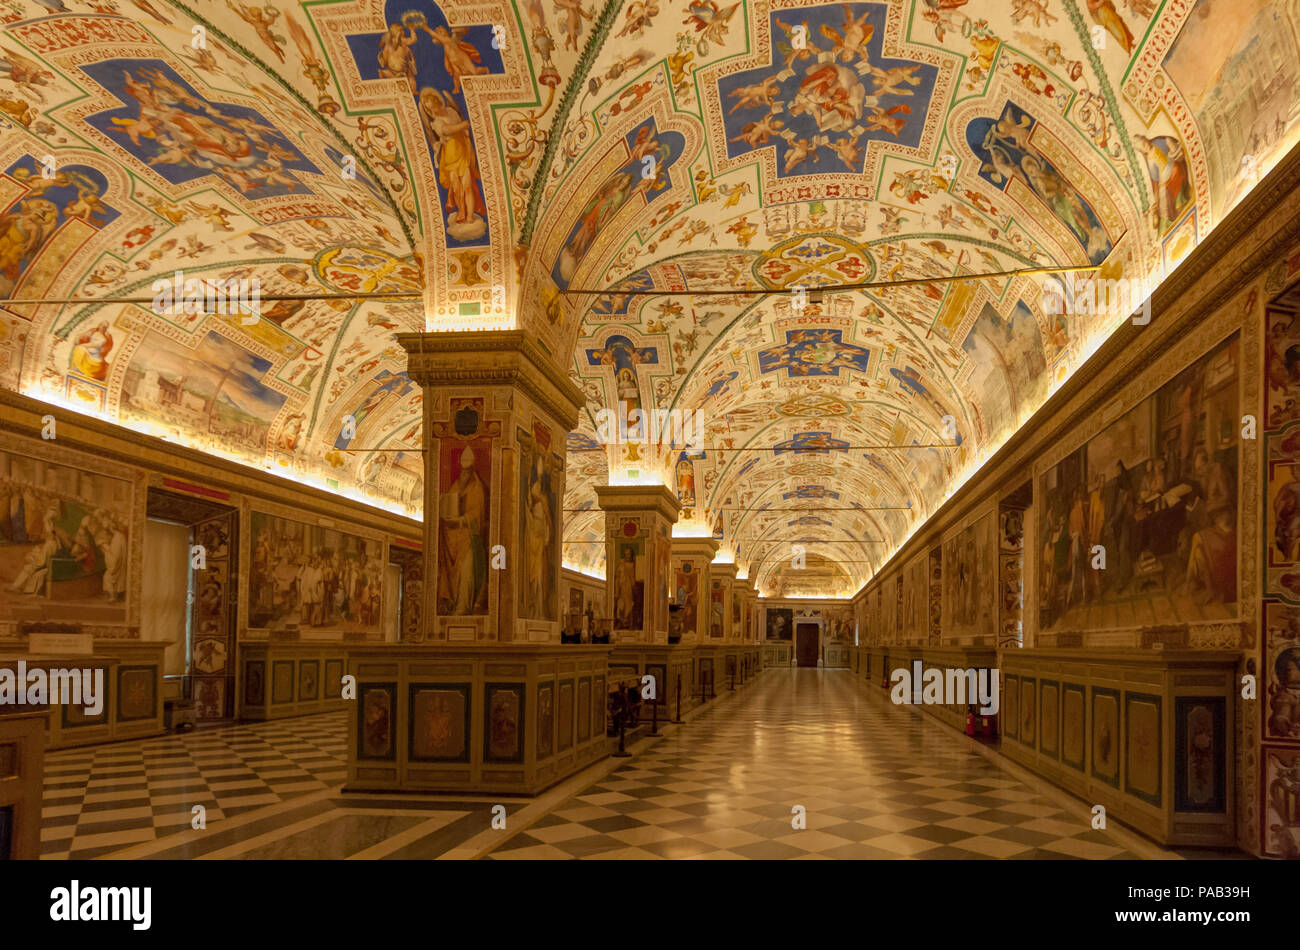 The magnificent ceiling and wall paintings of the Sistine Hall in the Vatican Apostolic Library in Rome Stock Photo